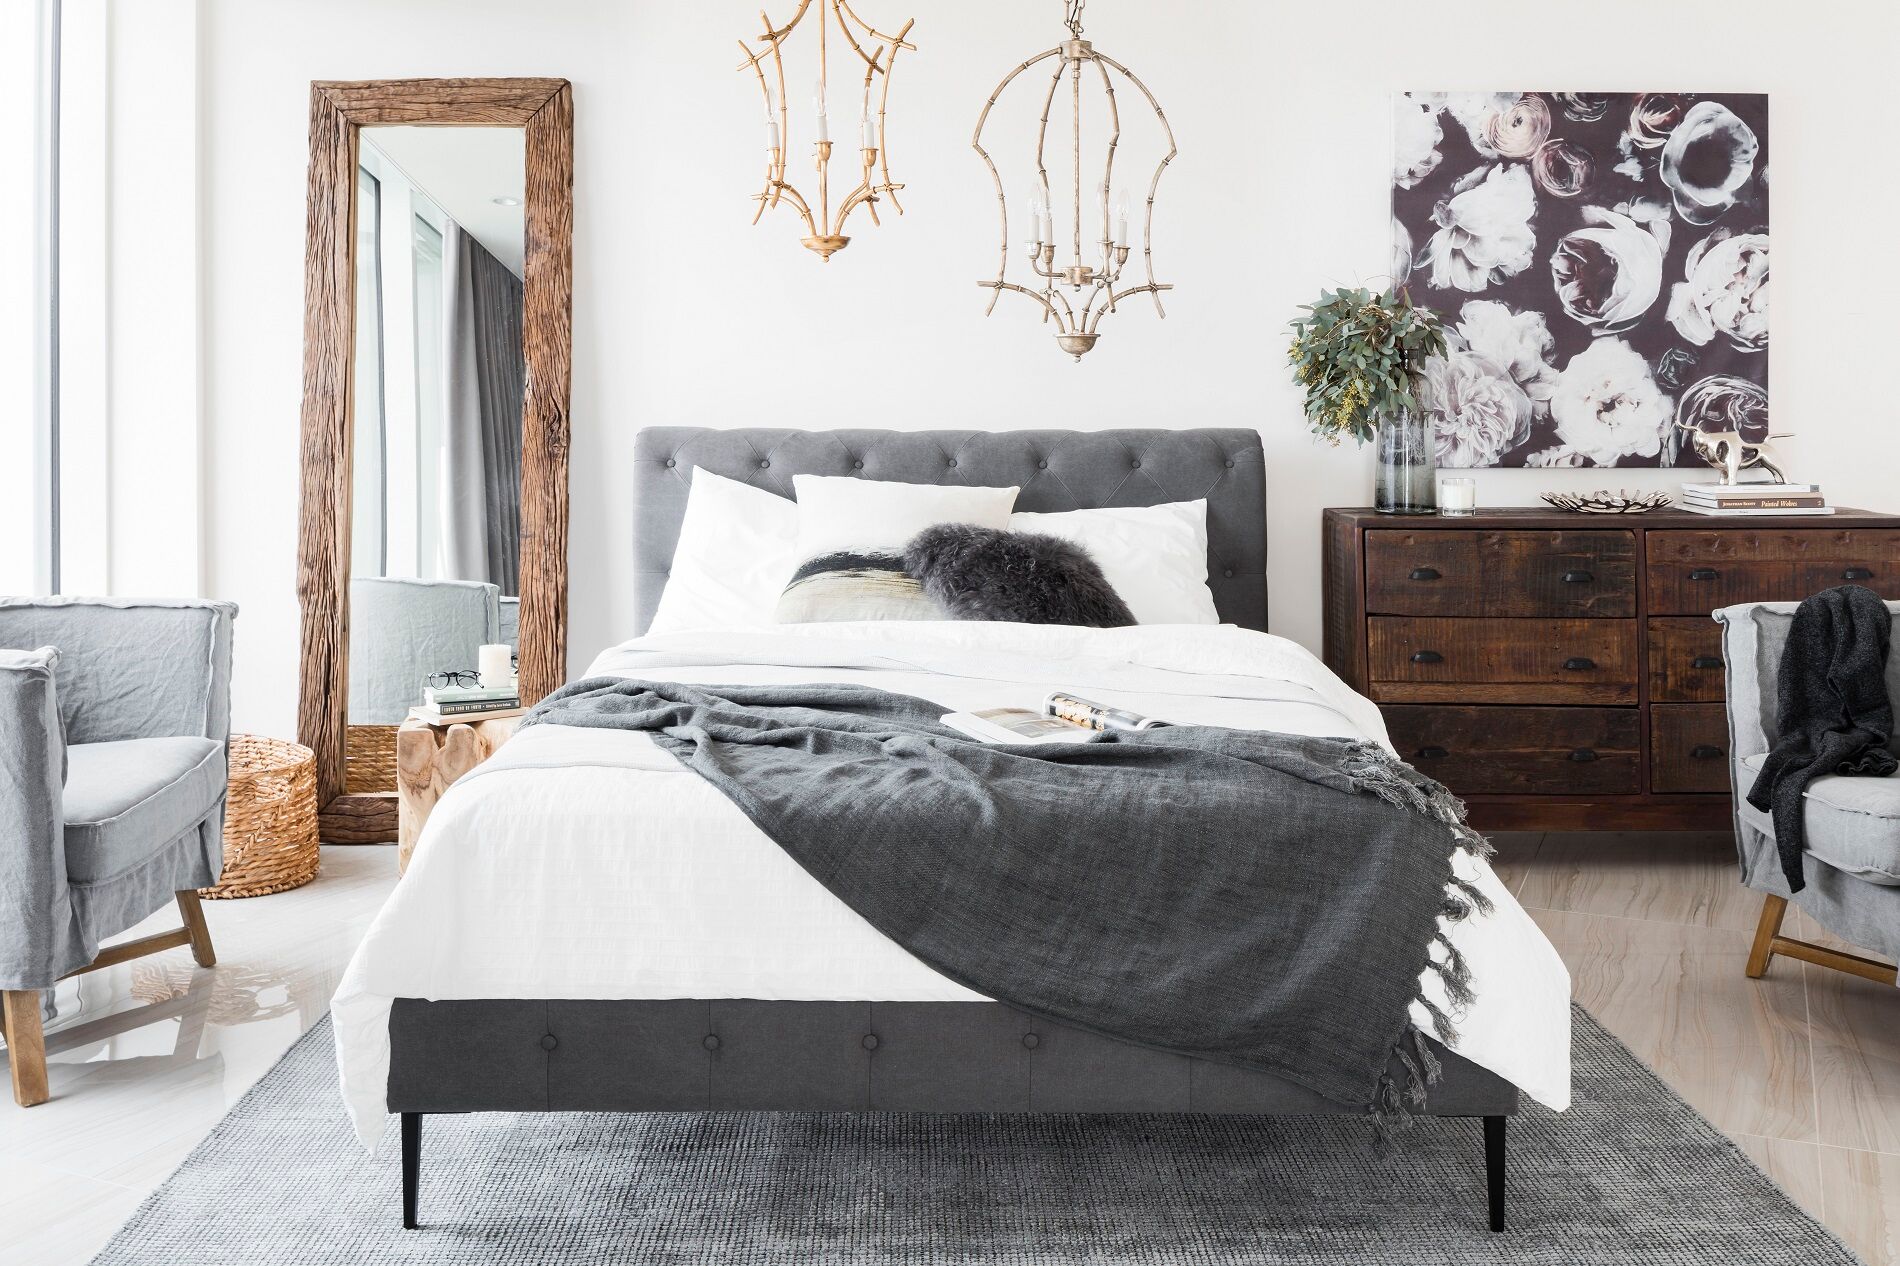 Parker Gwen features innovative and high-quality furniture for bedrooms.